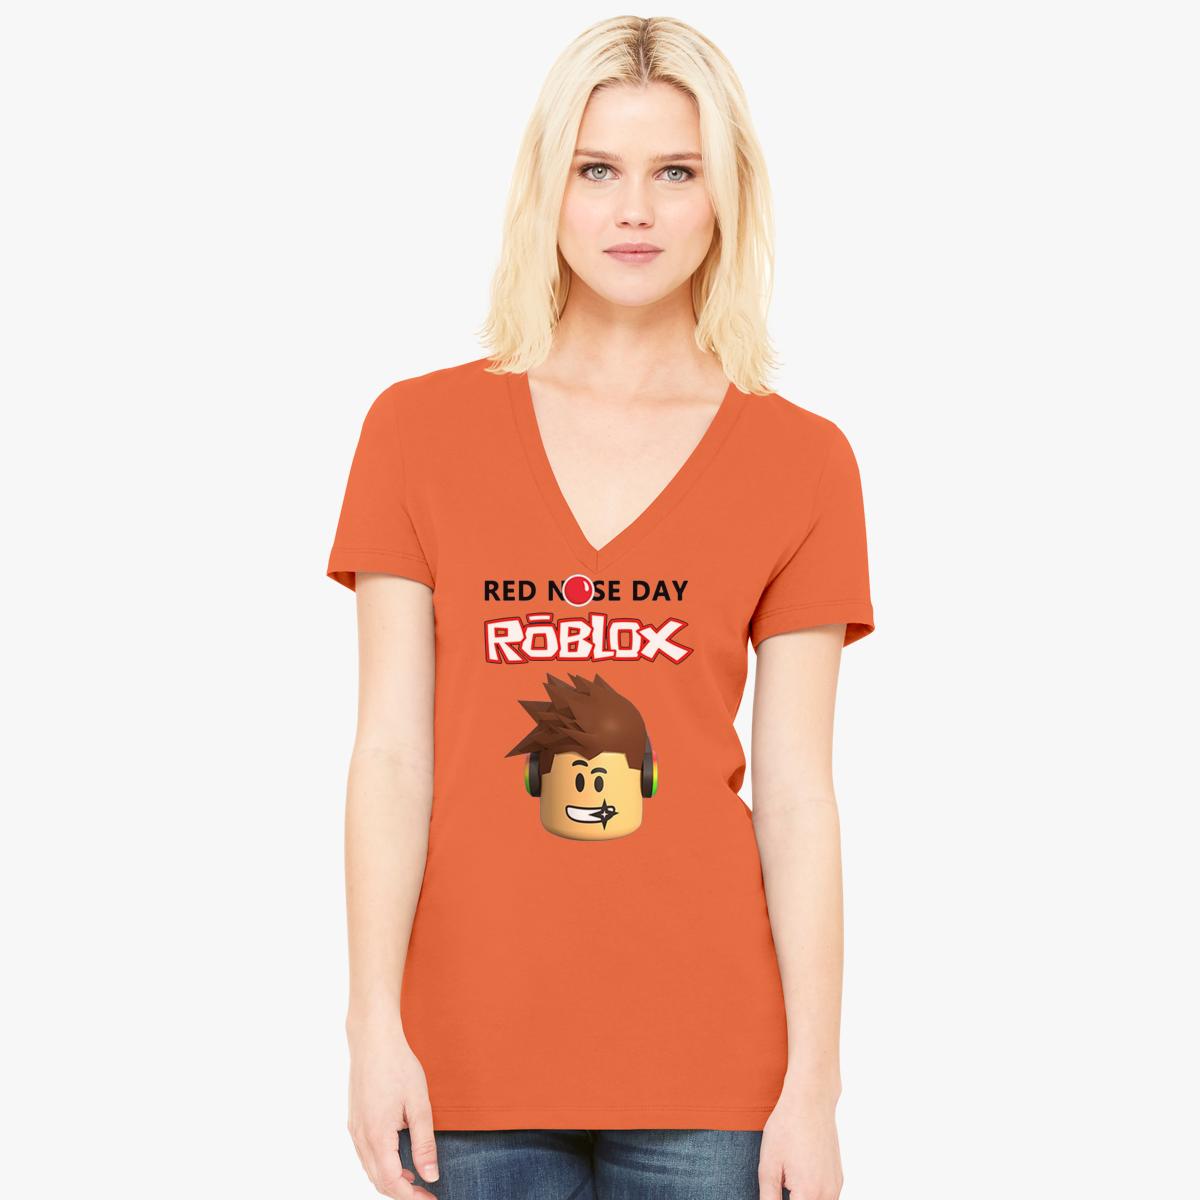 Roblox How To Copy Shirts With 0 Tissino - the 2015 roblox t shirt contest virtual roblox shirts